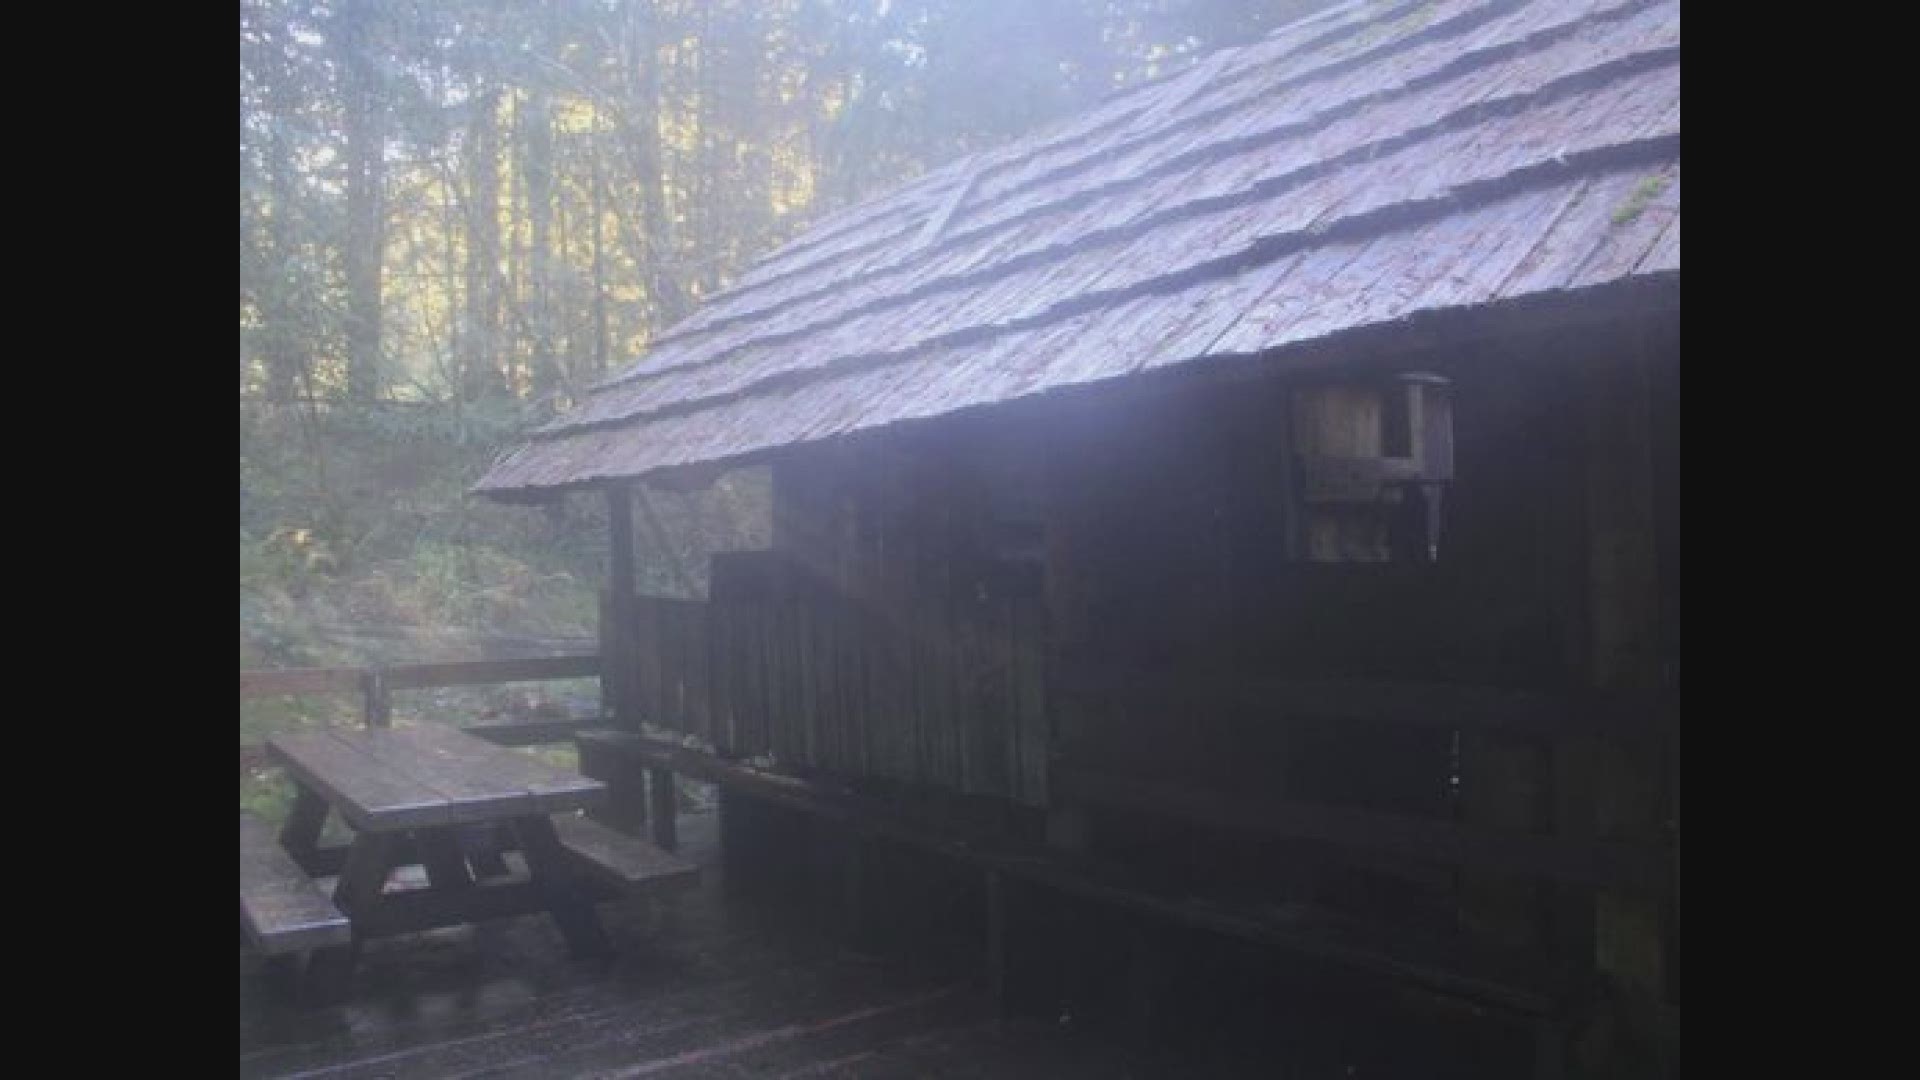 An iconic bathhouse at Bagby Hot Springs will be demolished this summer due to rotting in its floors, the U.S. Forest Service said.